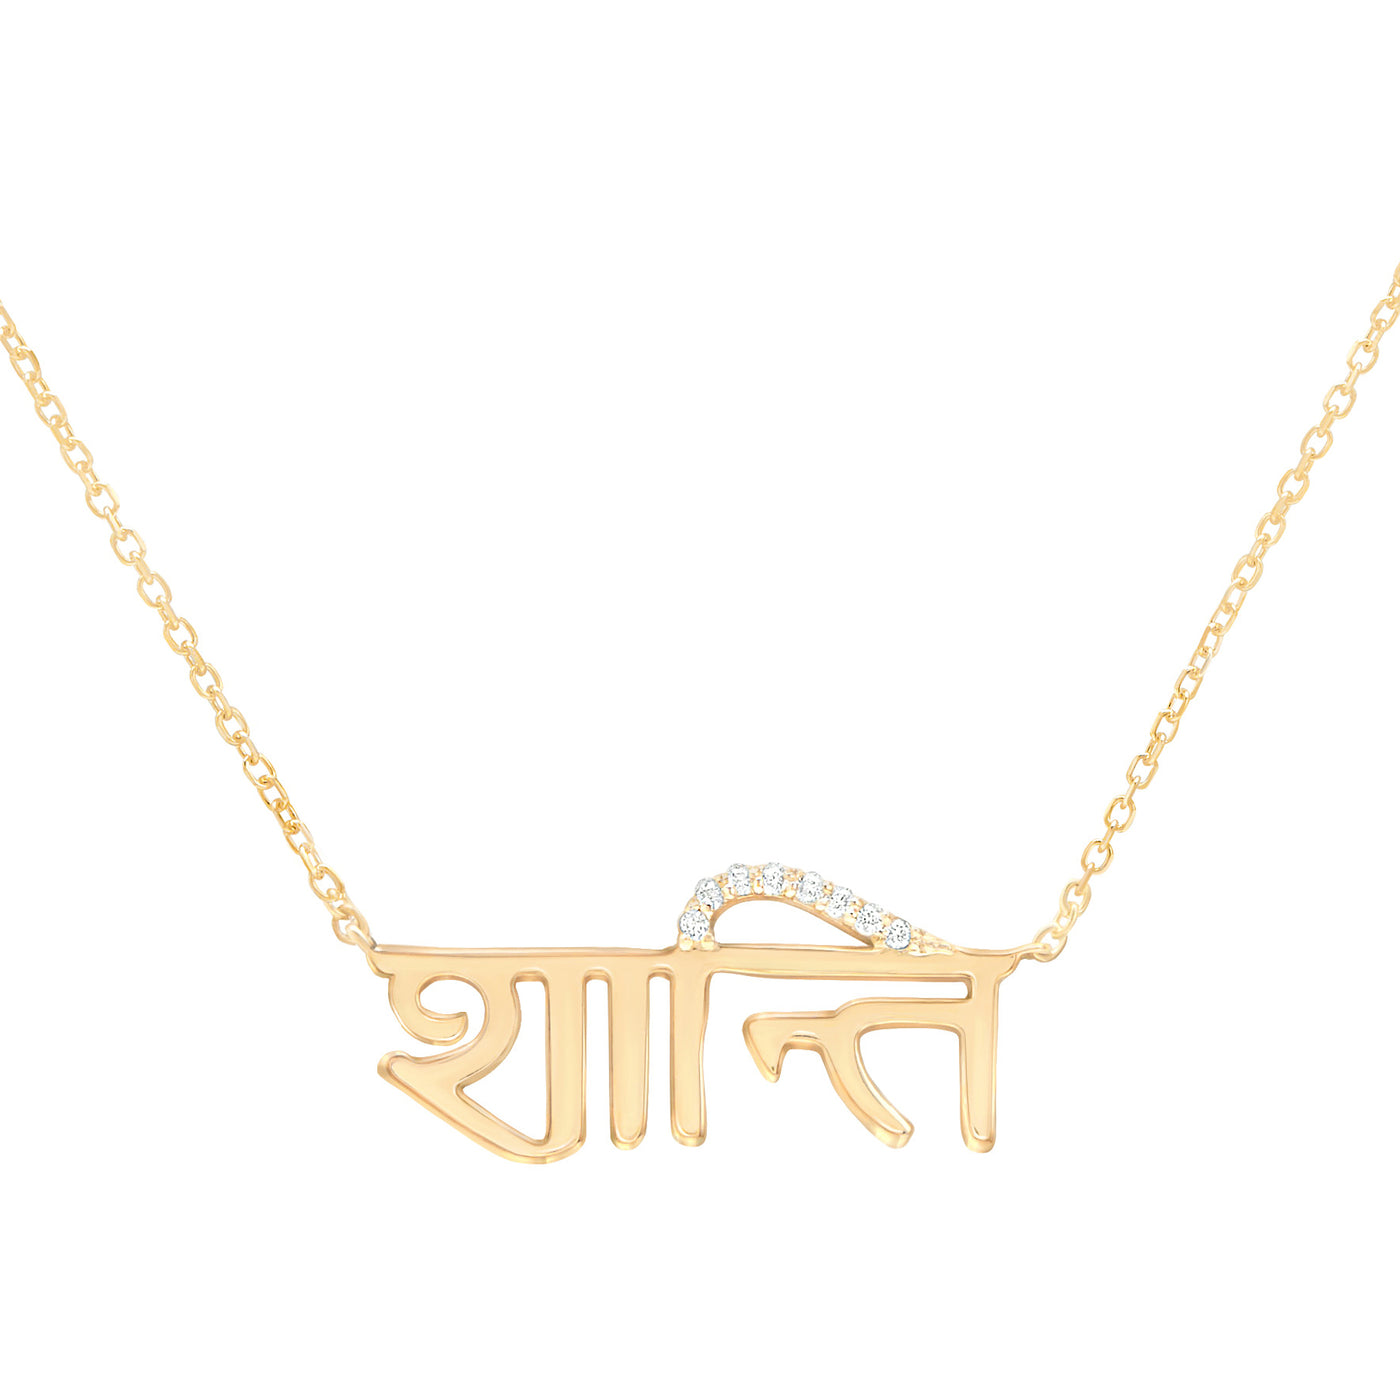 Shanti Necklace in Yellow Gold with Diamond on White Background